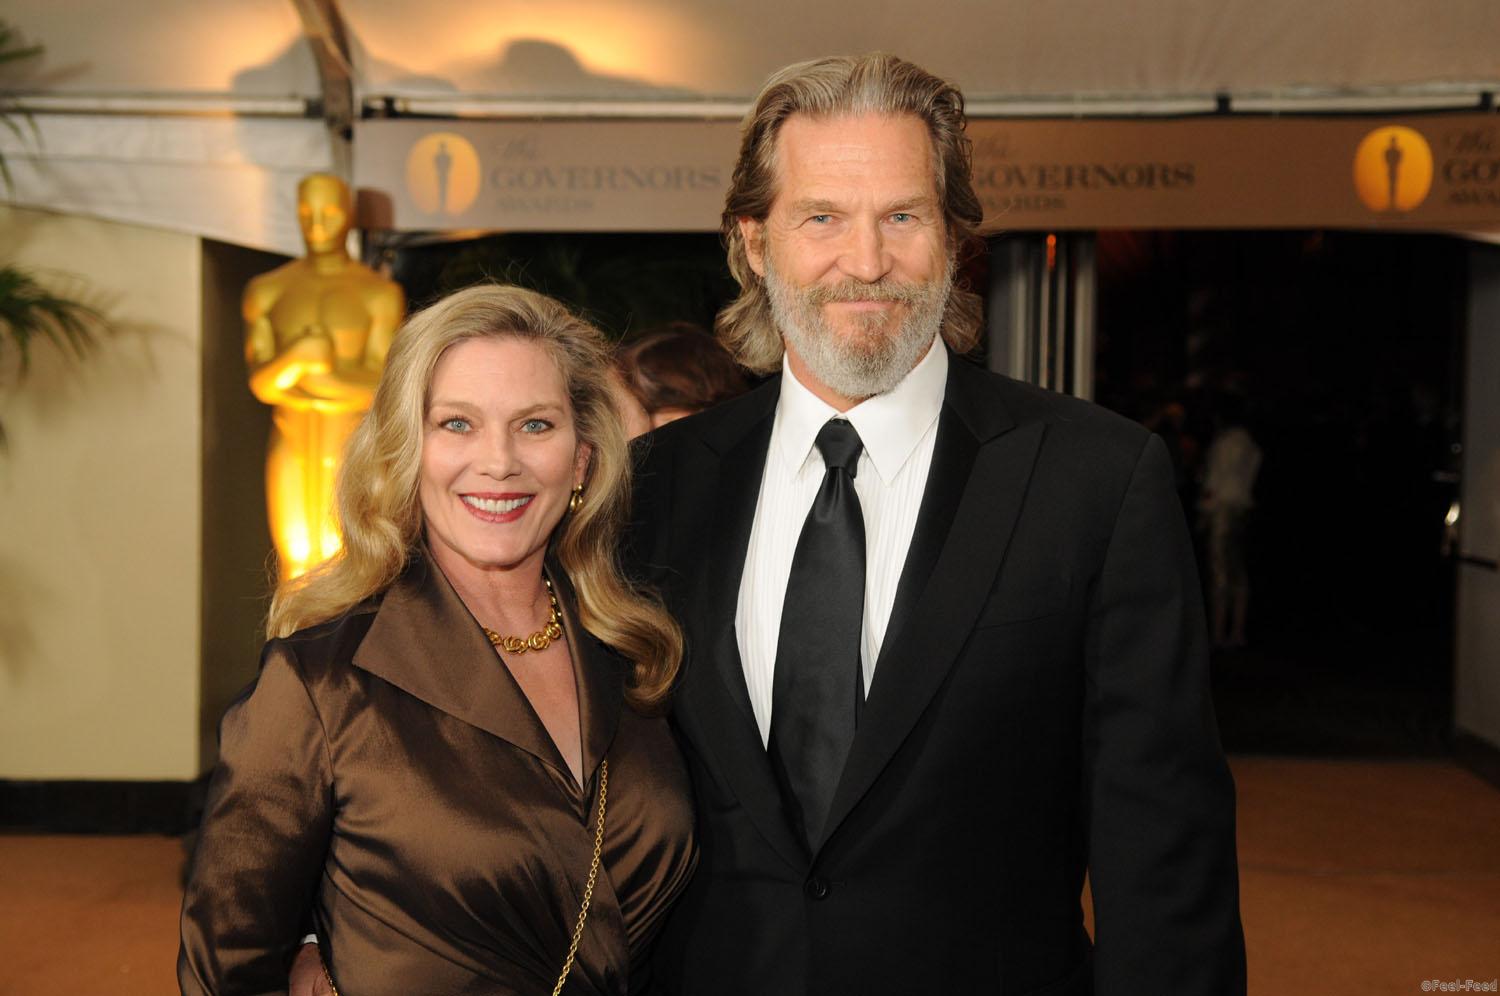 Previous Oscar¨-nominee Jeff Bridges and wife Susan attend the 2009 Governors Awards in the Grand Ballroom at Hollywood & Highland in Hollywood, CA, Saturday, November 14.